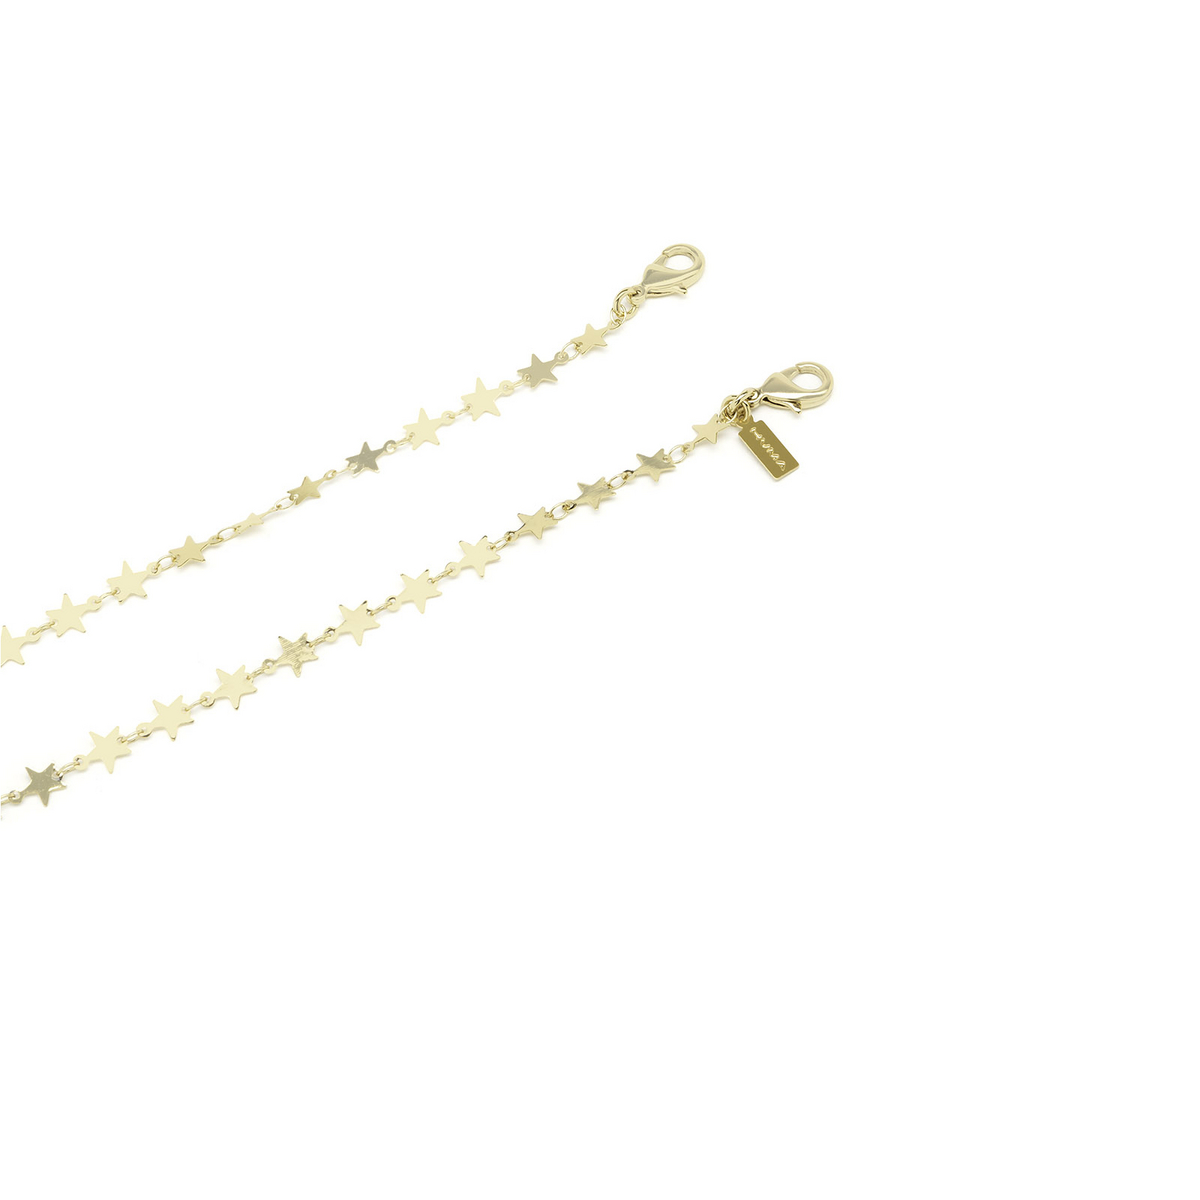 Huma® Accessories: Star Chain color Gold L04 - product thumbnail 1/3.